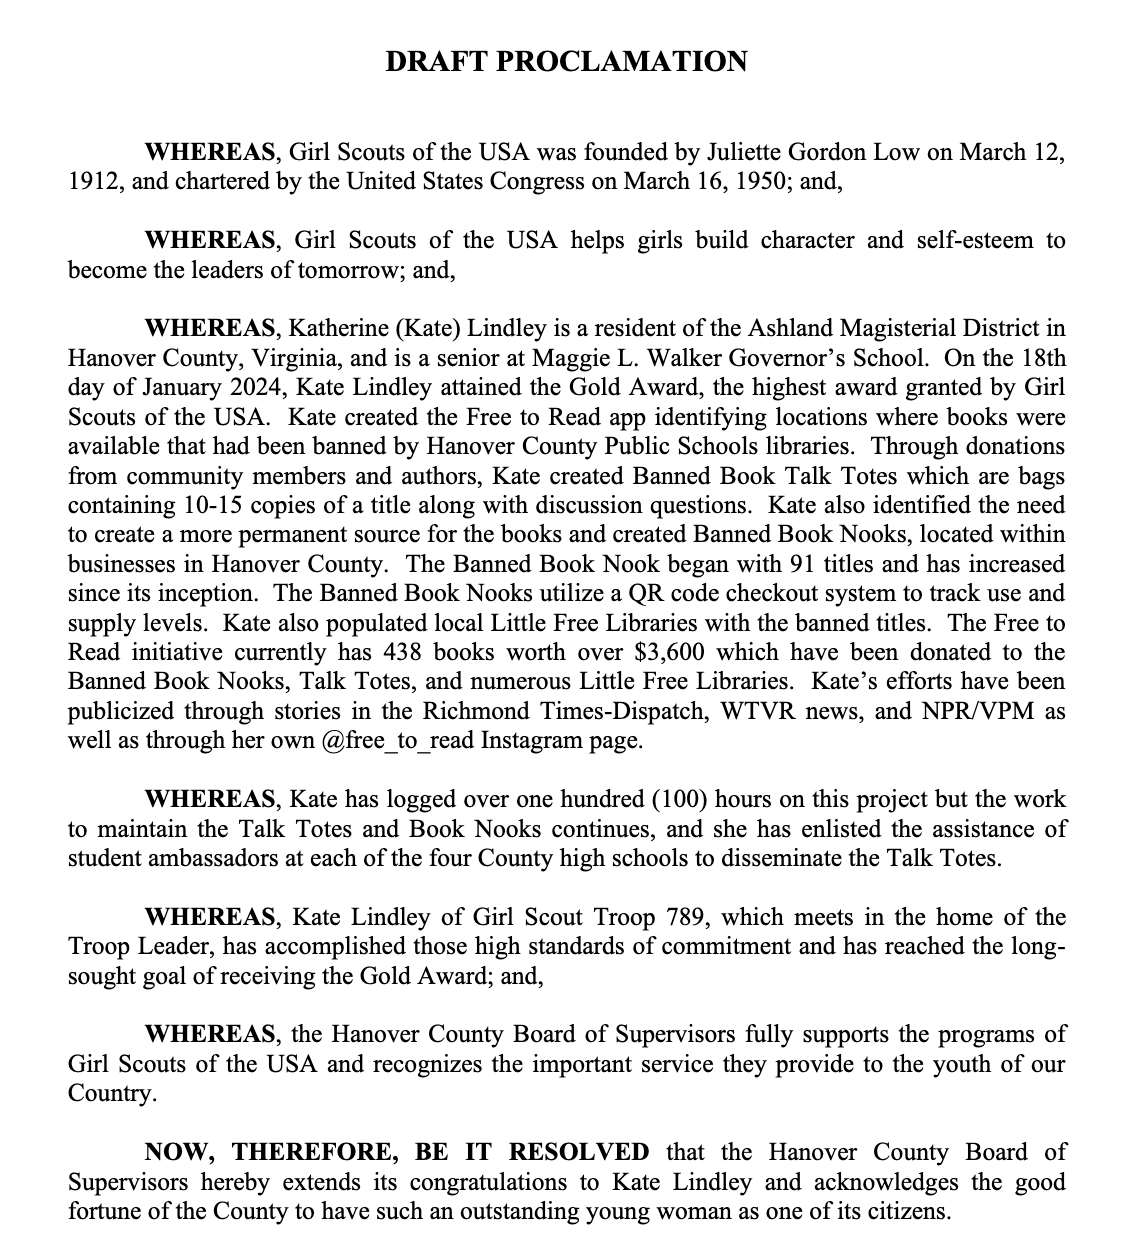 Image of the draft proclamation for Kate Lindley. 